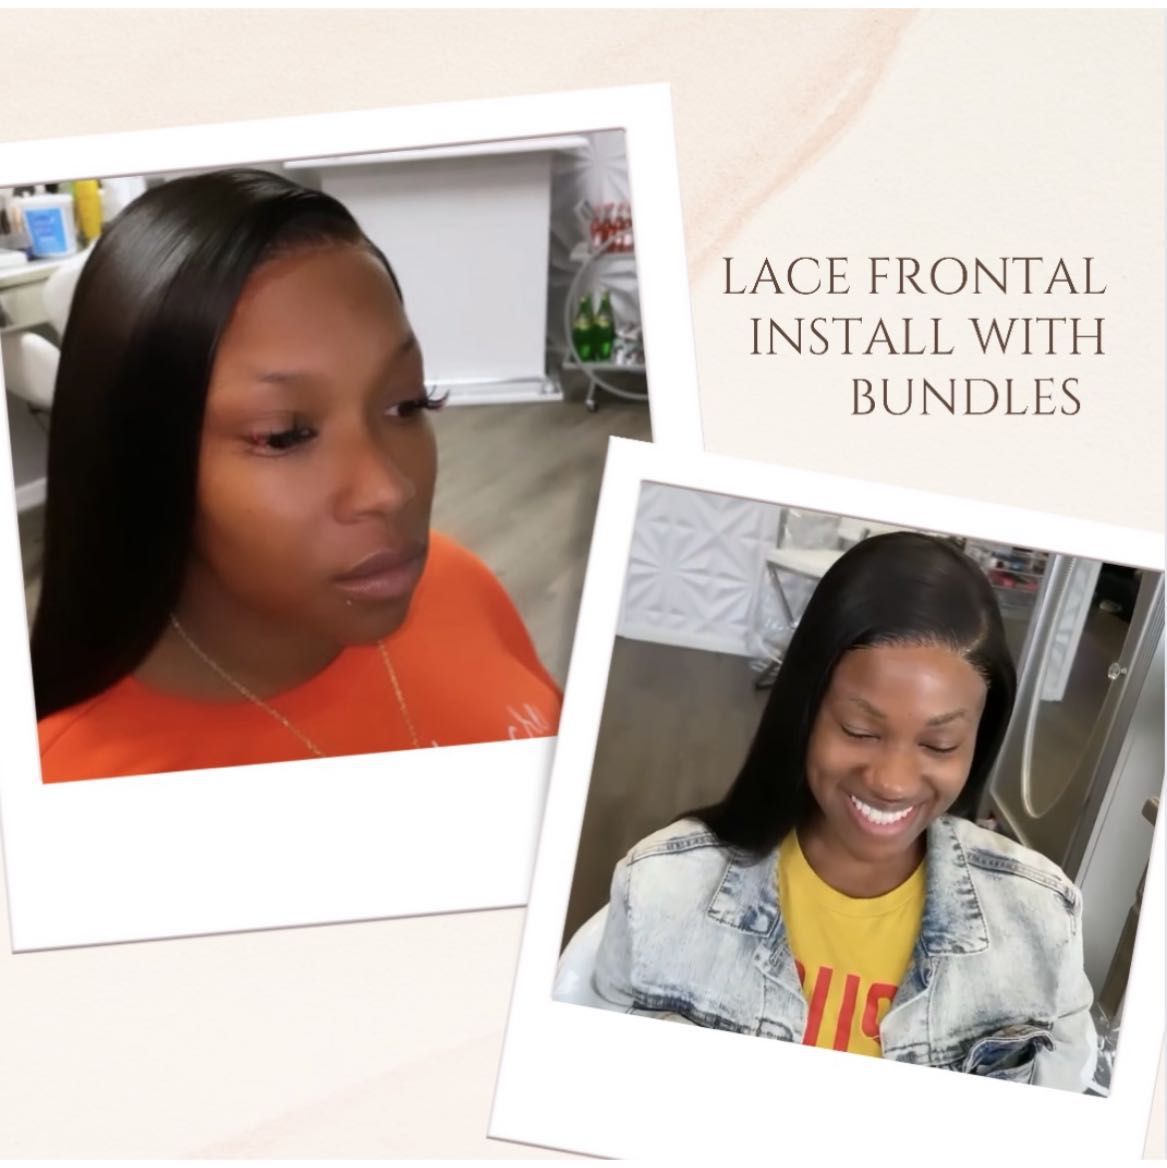 Lace Frontal With Bundles Install portfolio